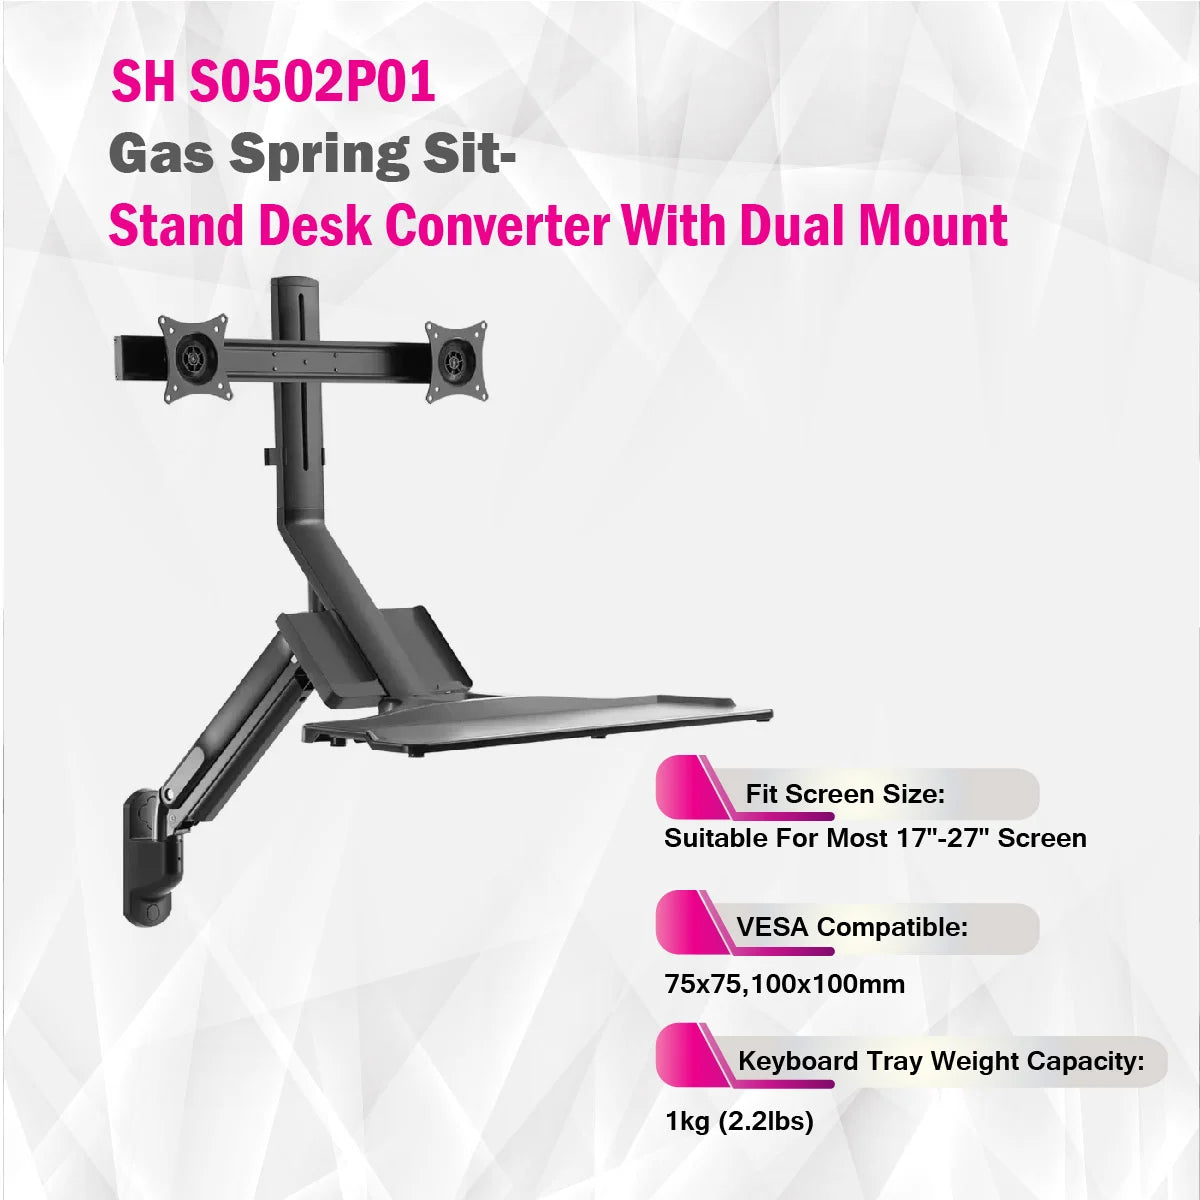 Skill Tech SHS05 W02 | Gas Spring Sit-Stand Desk Converter With Dual Mount Ergonomic Mount